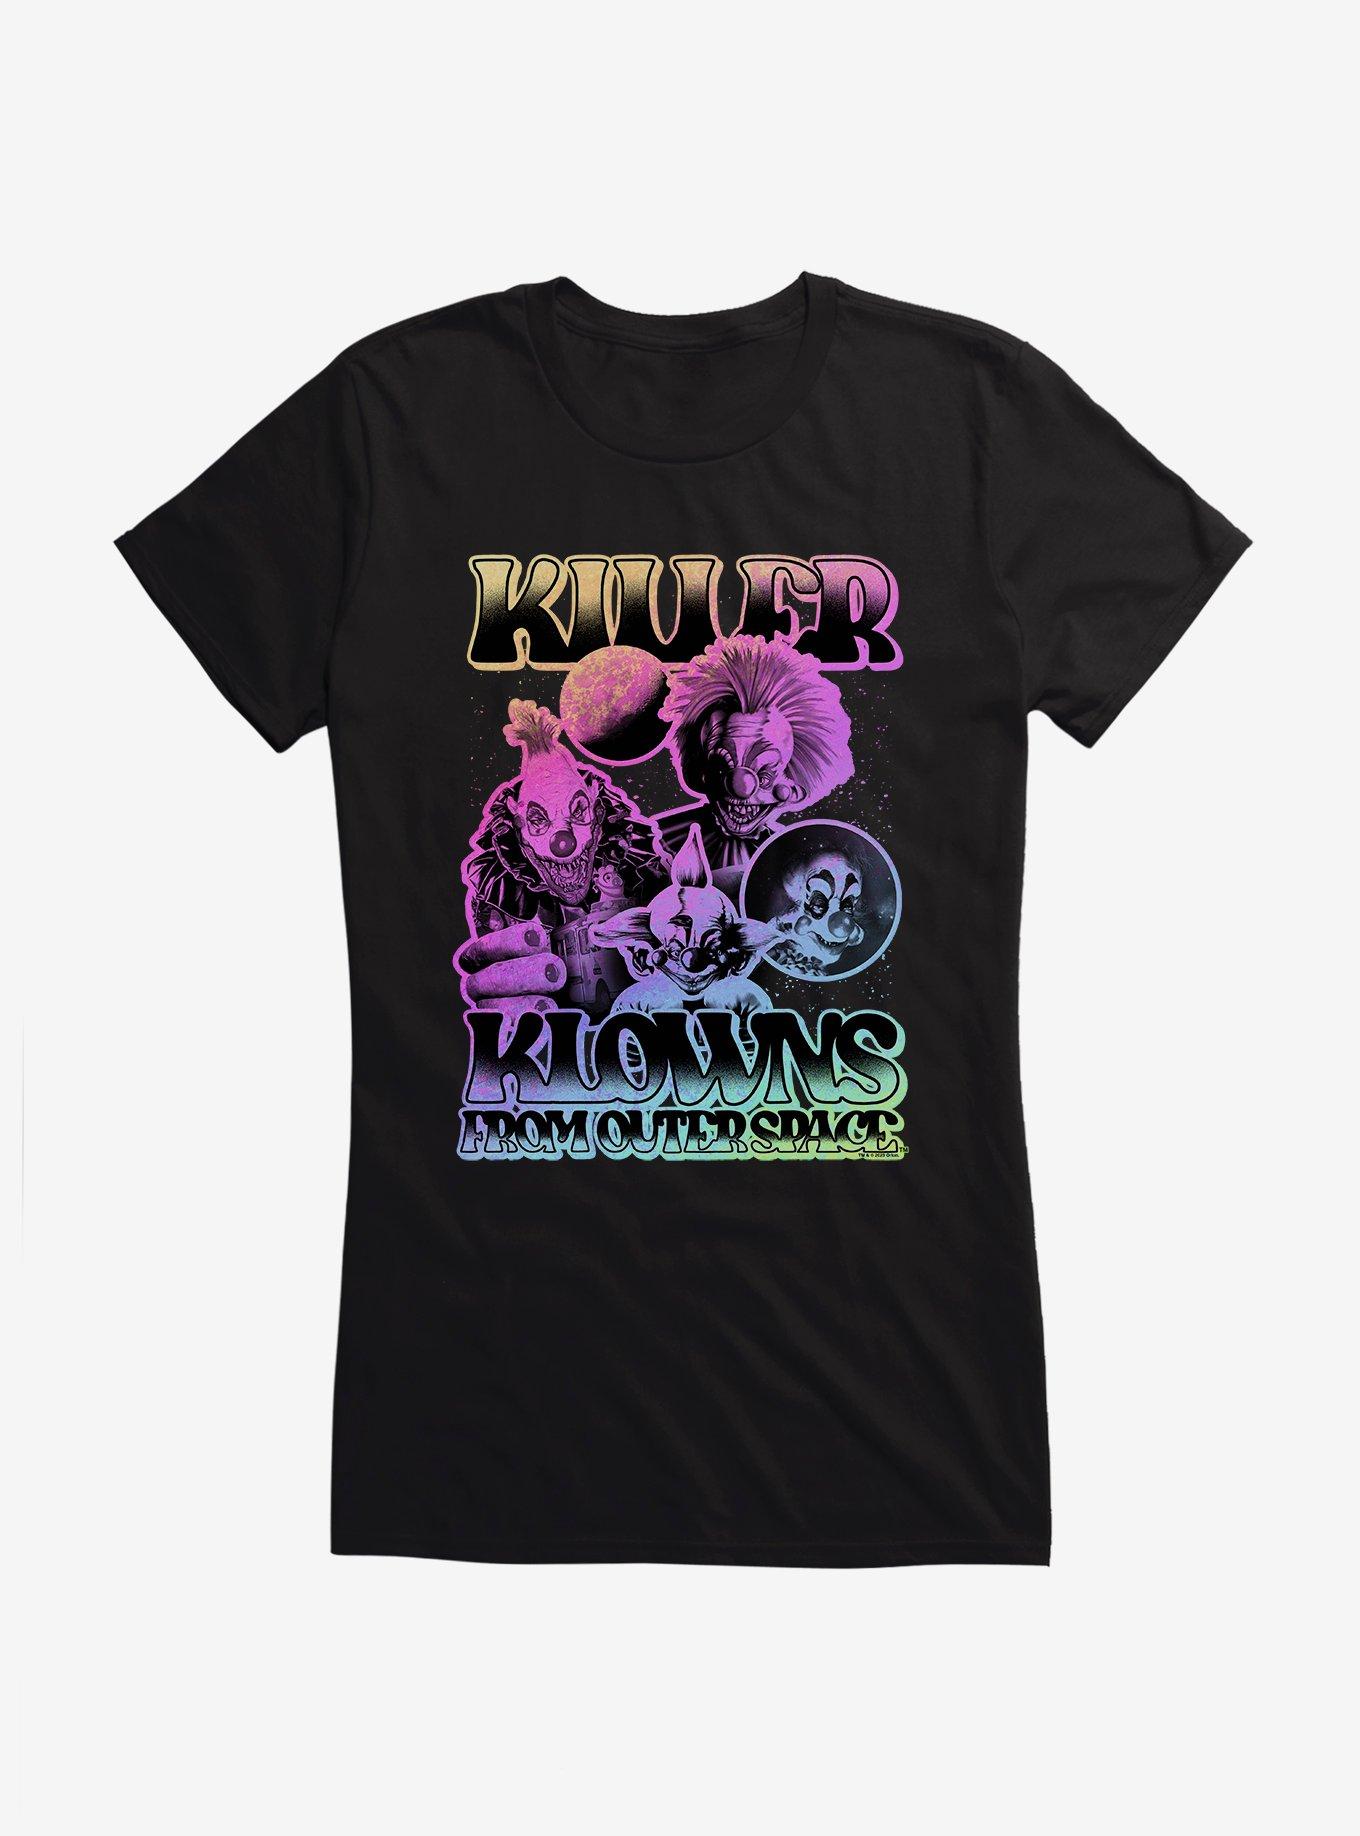 Killer Klowns From Outer Space Gradient Group Girls T-Shirt, BLACK, hi-res